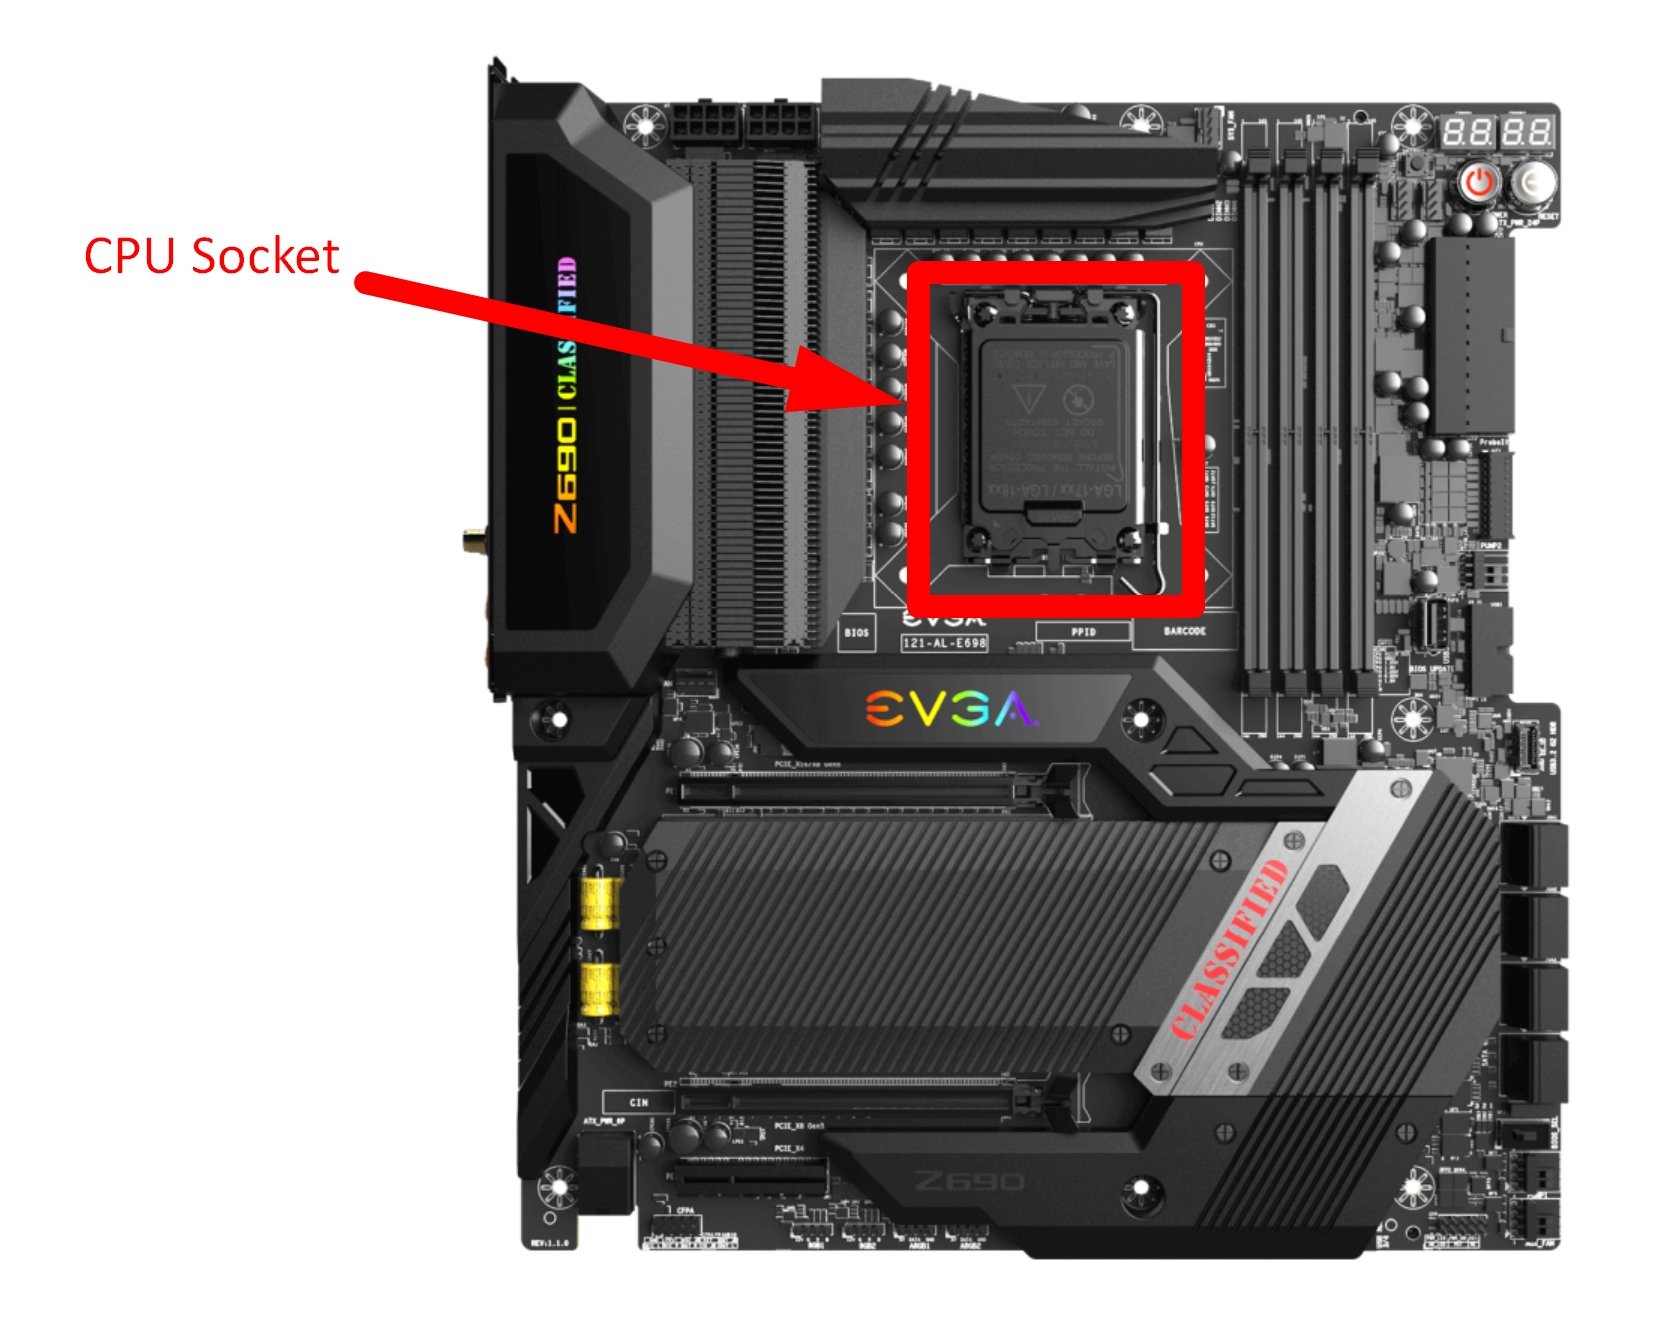 To Find Out Which CPU is compatible With Motherboard